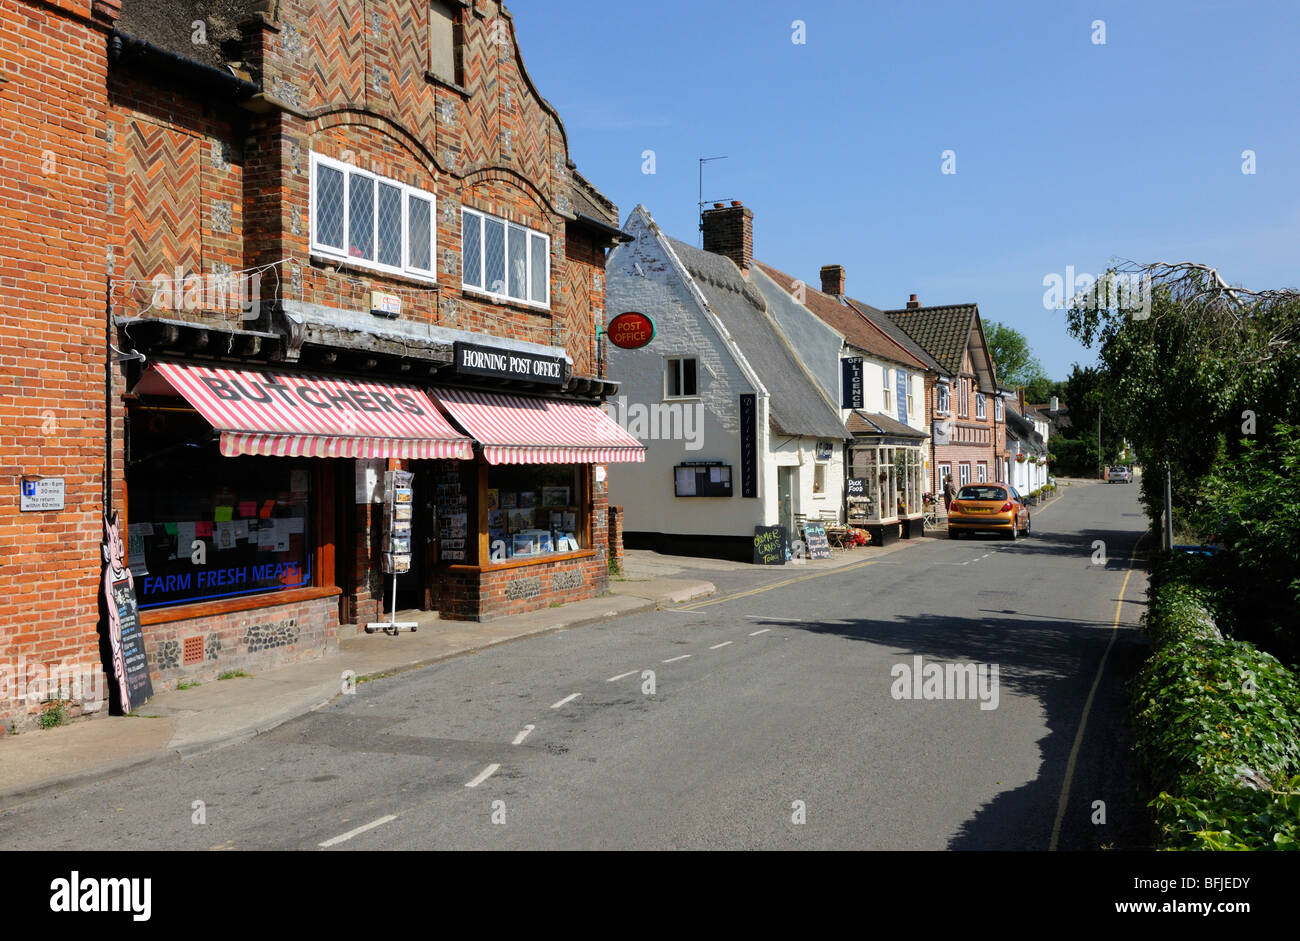 The Butchers and Post Office, Lower Street, Horning, Norfolk Broads, England, UK. Stock Photo